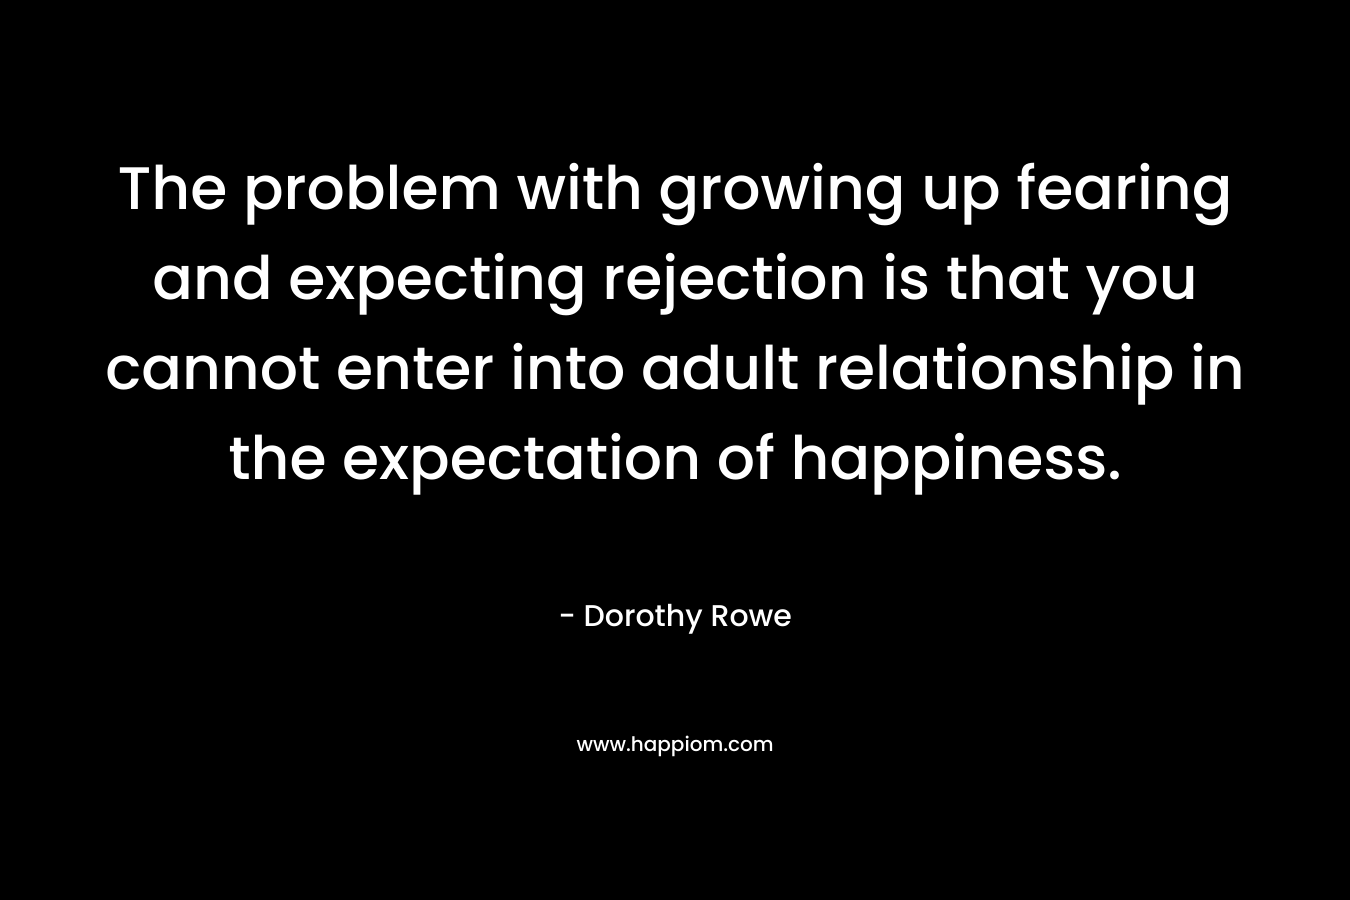 The problem with growing up fearing and expecting rejection is that you cannot enter into adult relationship in the expectation of happiness. – Dorothy Rowe